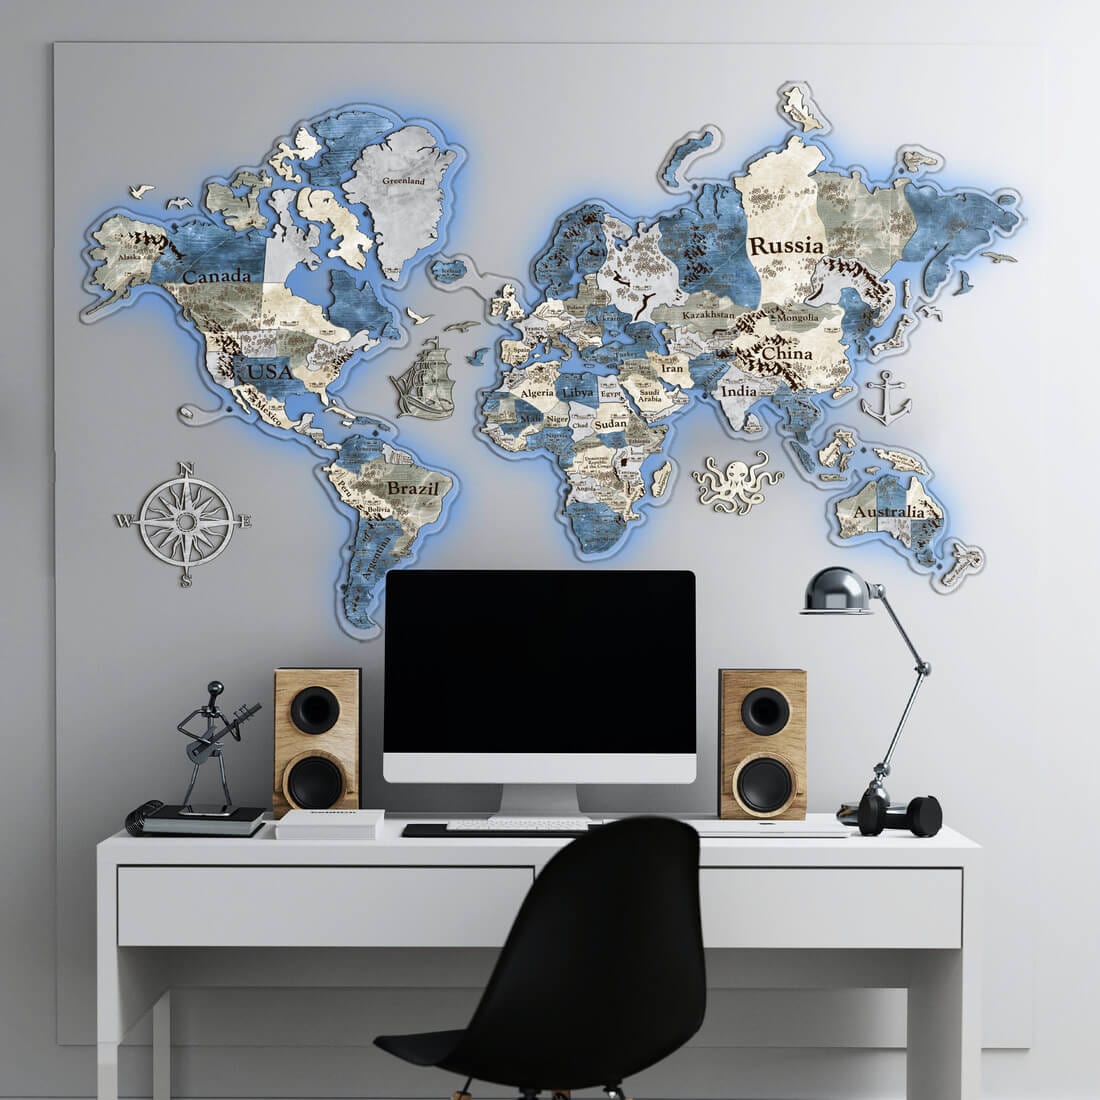 3D LED Colored Wooden World Map (Perfect World) - Diamond Blue